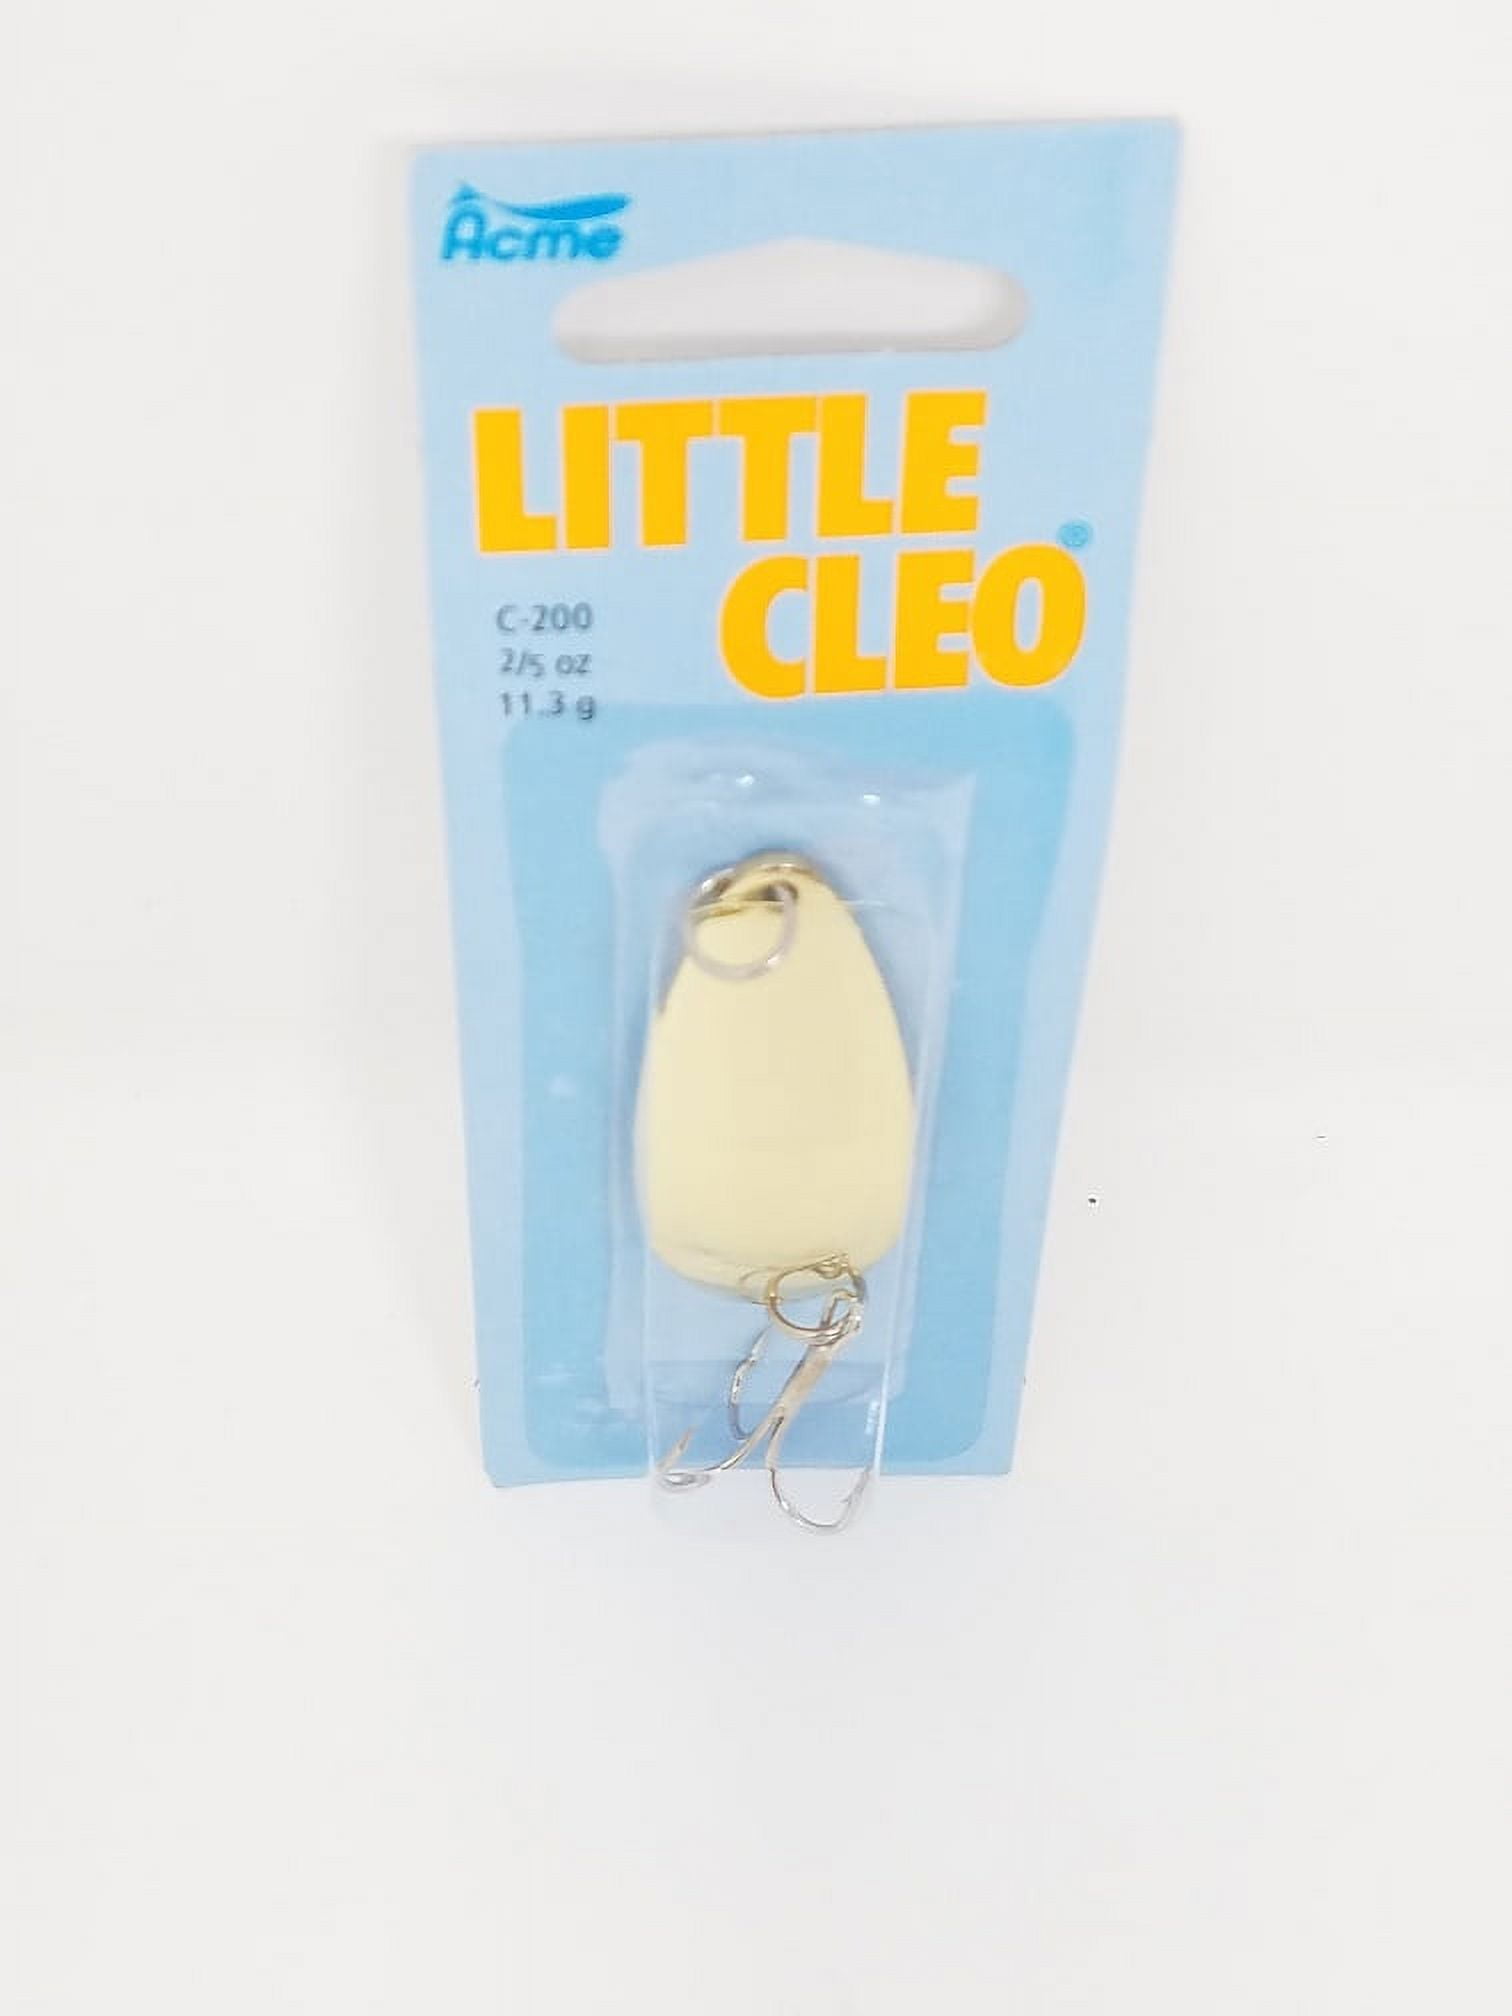 Acme Tackle Little Cleo Fishing Spoon Gold 2/5 oz. 